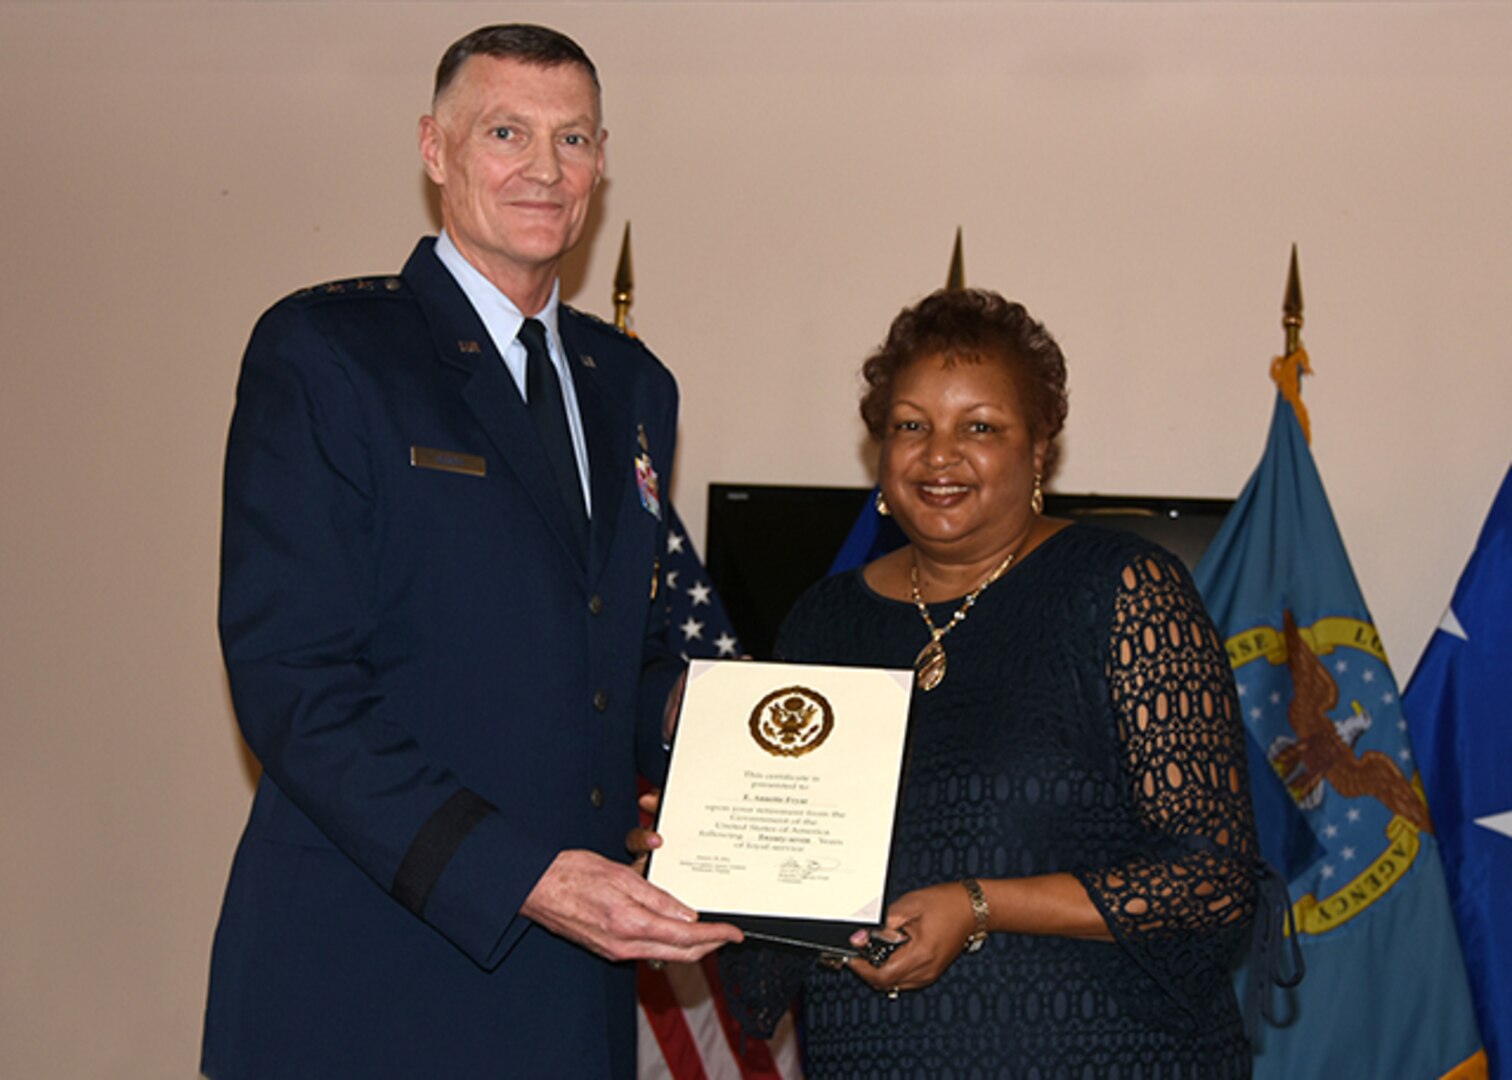 DLA Aviation's Secretary to the Commander Annette Fryar is awarded a certificate of retirement, after 27 years of federal service, from DLA Director, Air Force Lt. Gen. Andy Busch in a ceremony held Feb. 5, 2016 at DLA Aviation's Community Center in Richmond.